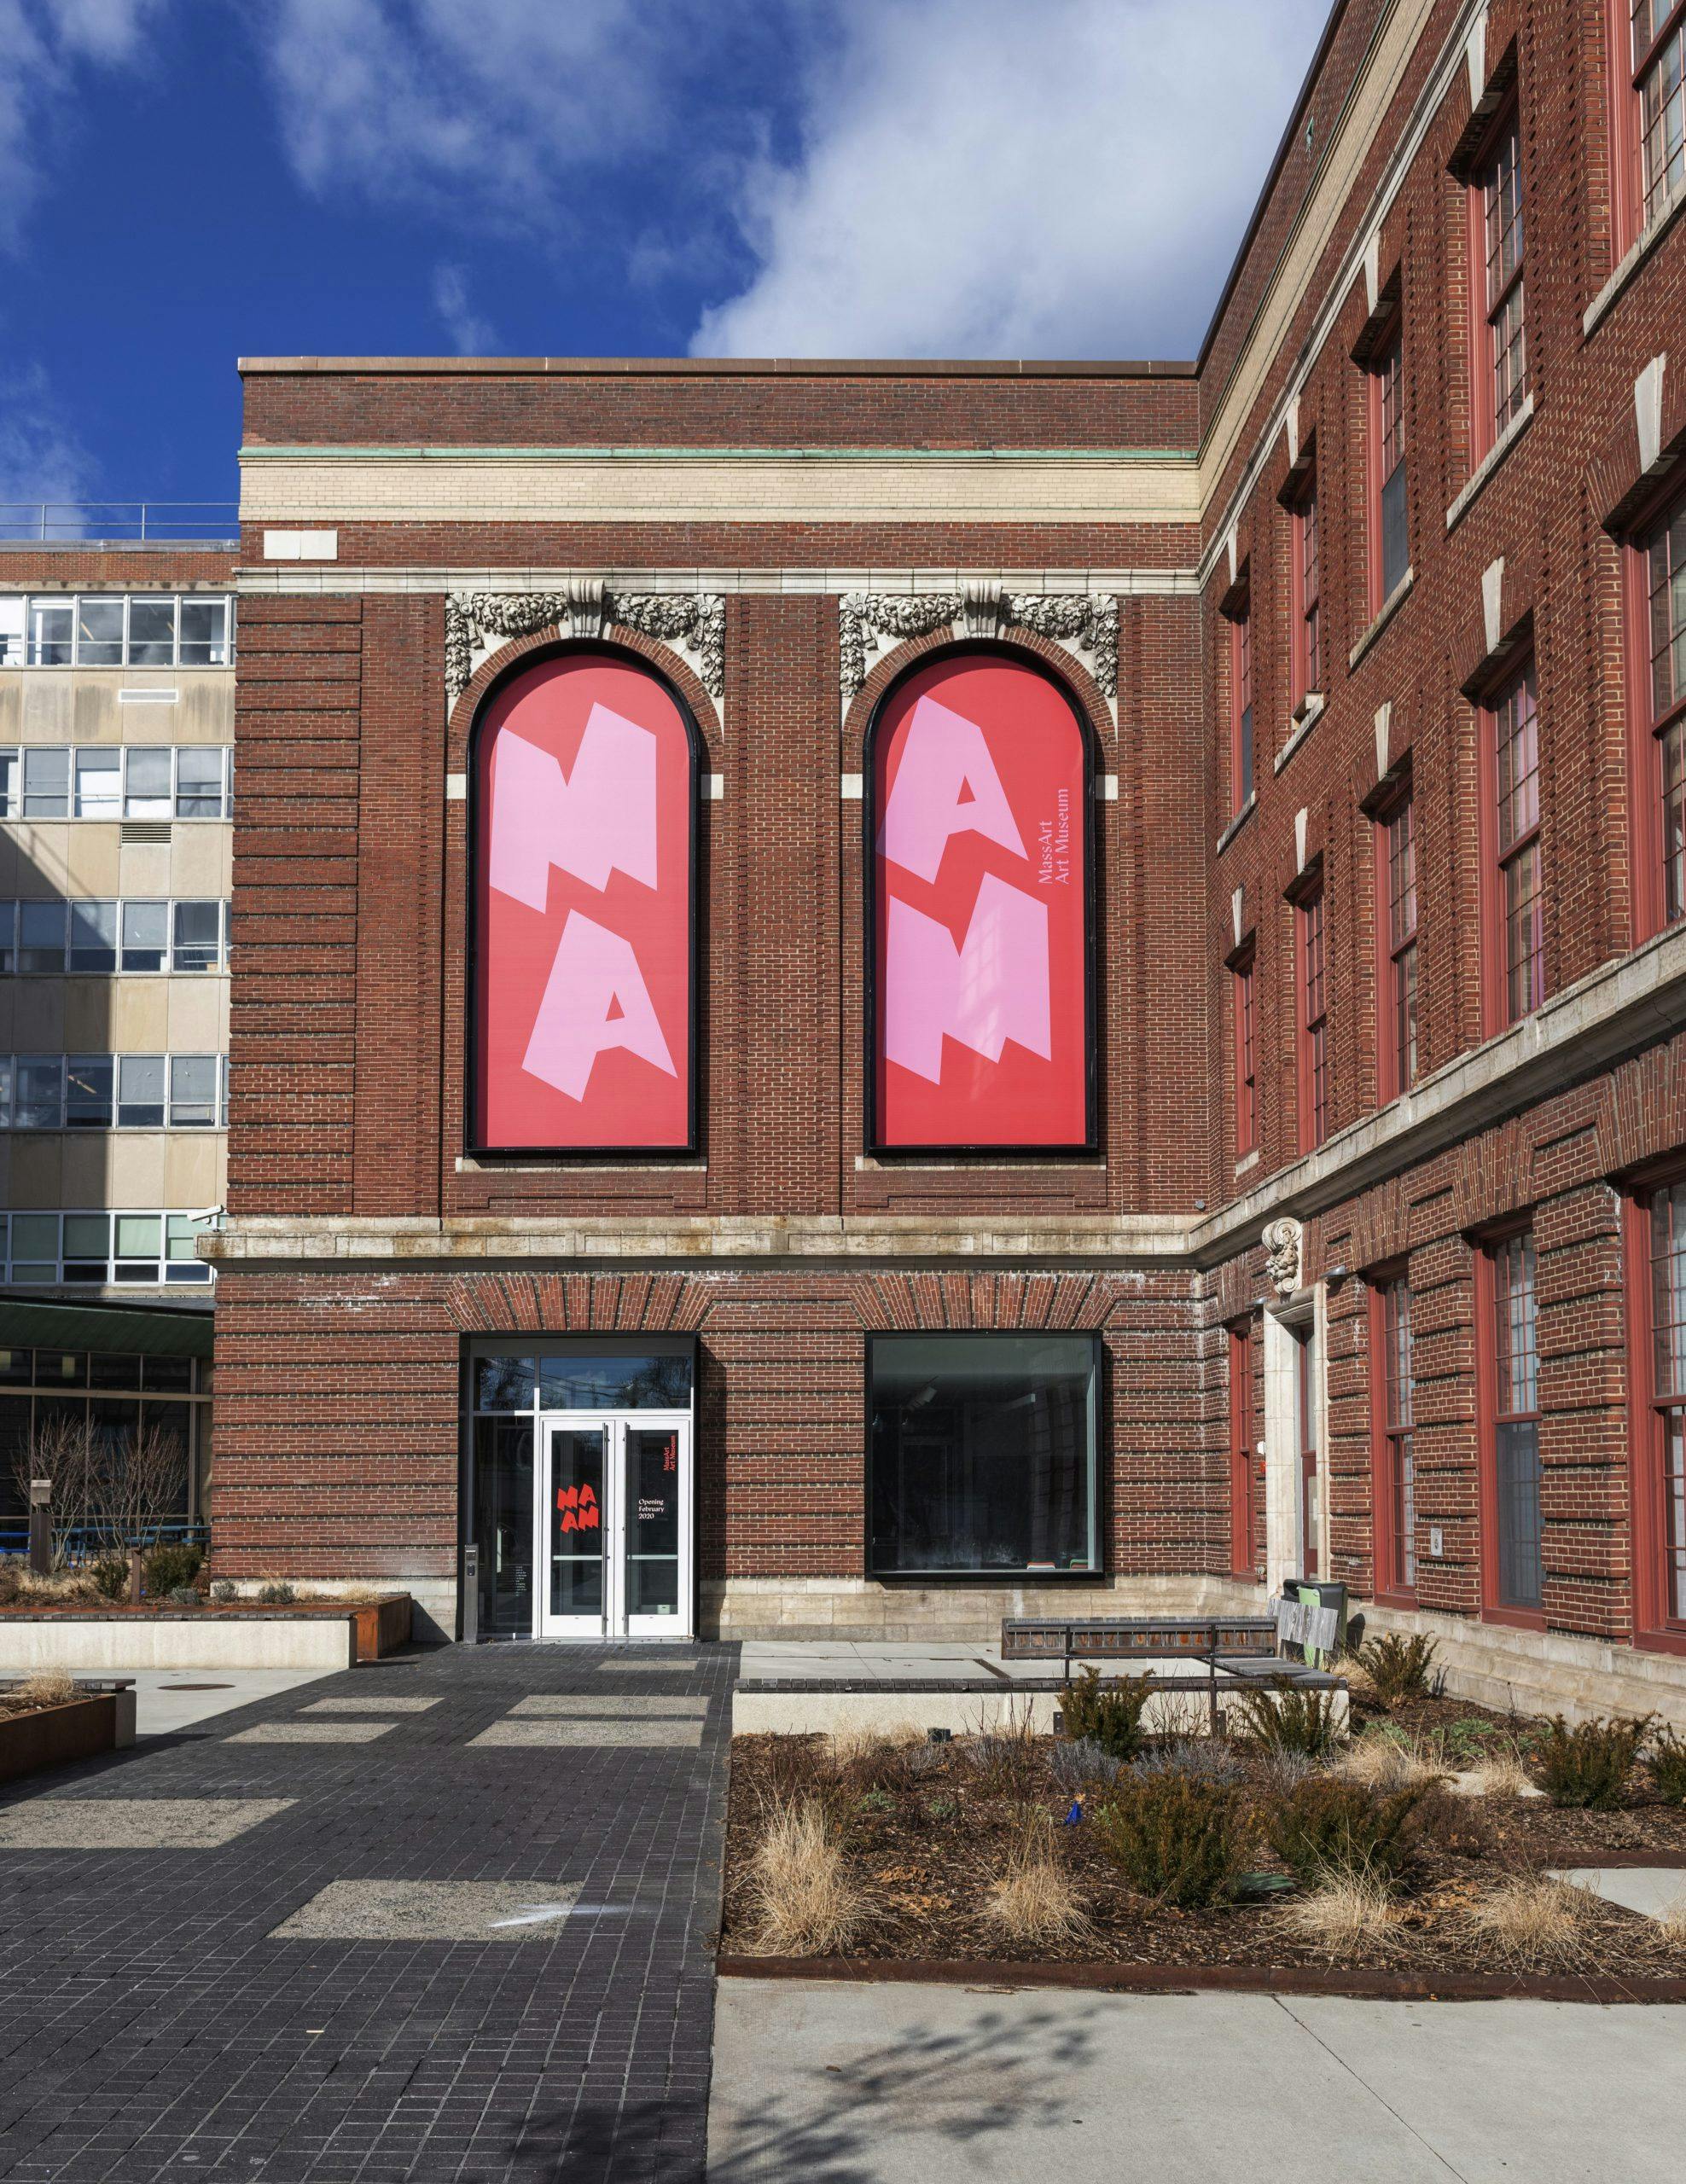 The red brick building of MAAM, displaying red and pink signs in the arched windows.